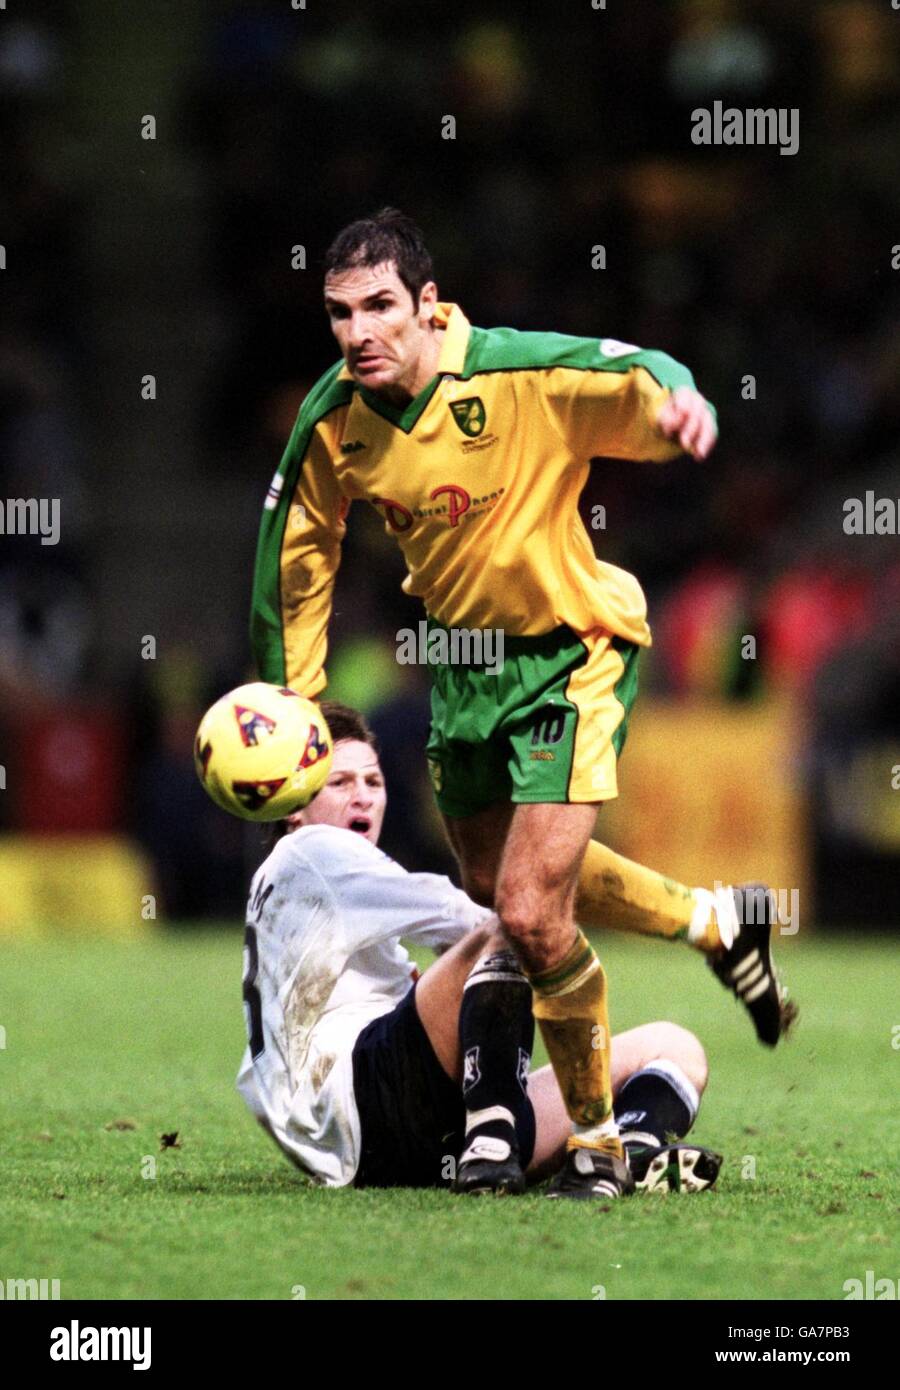 Soccer - Nationwide League Division One - Norwich City v Millwall. Norwich City's Steen Nedergaard (r) gets past Millwall's Marc Bircham (l) Stock Photo